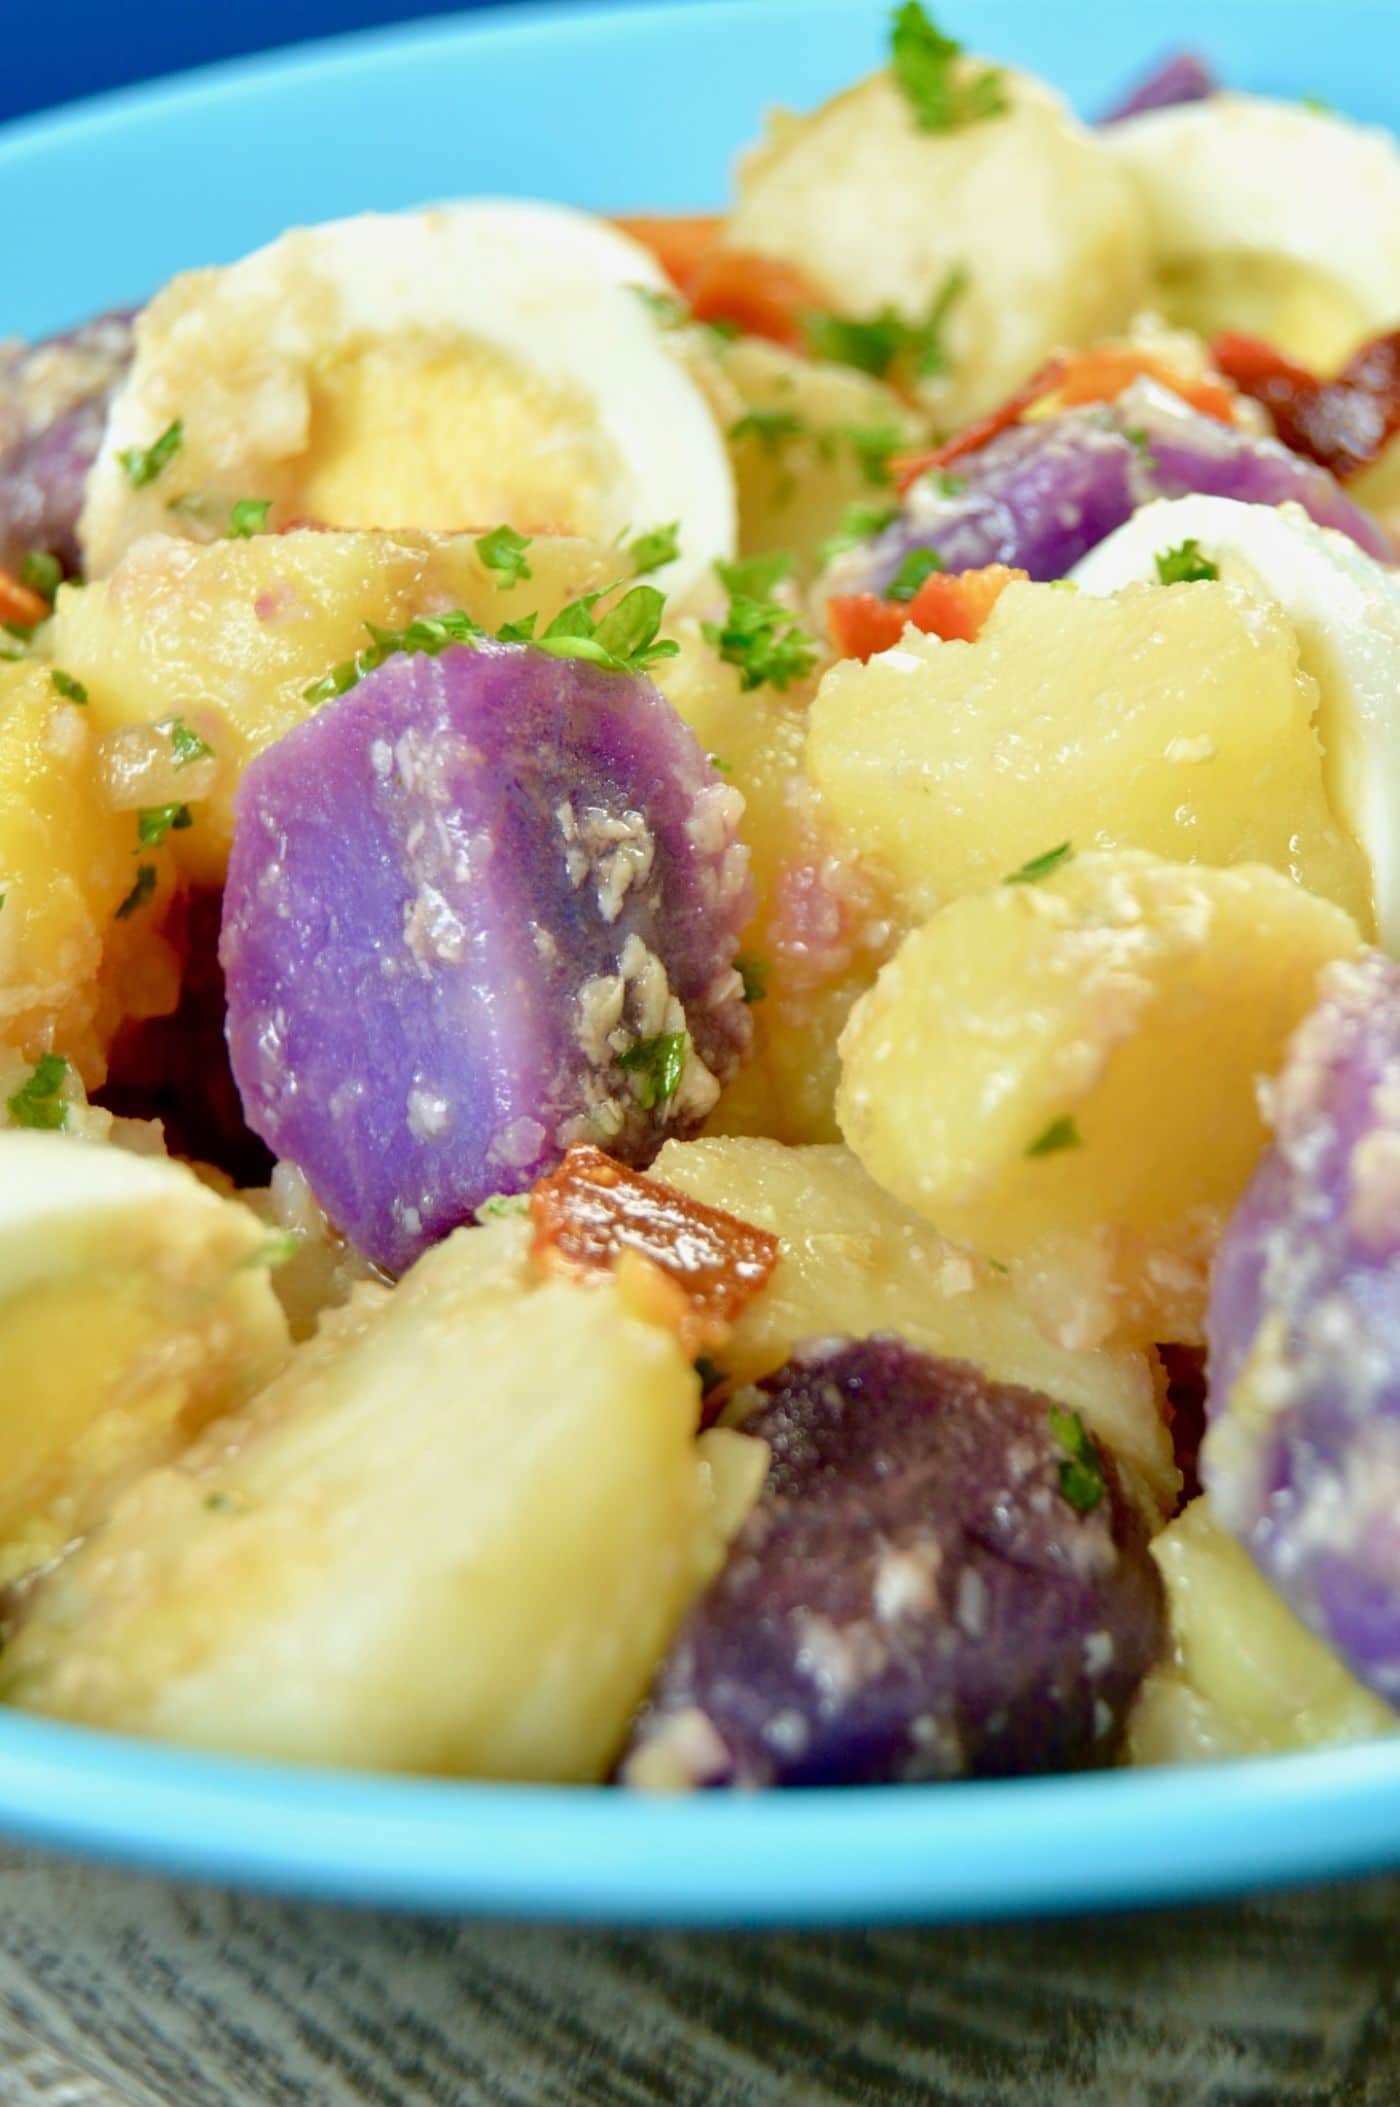 With three kinds of tender potatoes, this Creamy Mayo Free Caesar Style Potato Salad is loaded with parmesan cheese and bacon. Perfect for a grilled dinner, summertime meal or to bring to a picnic.